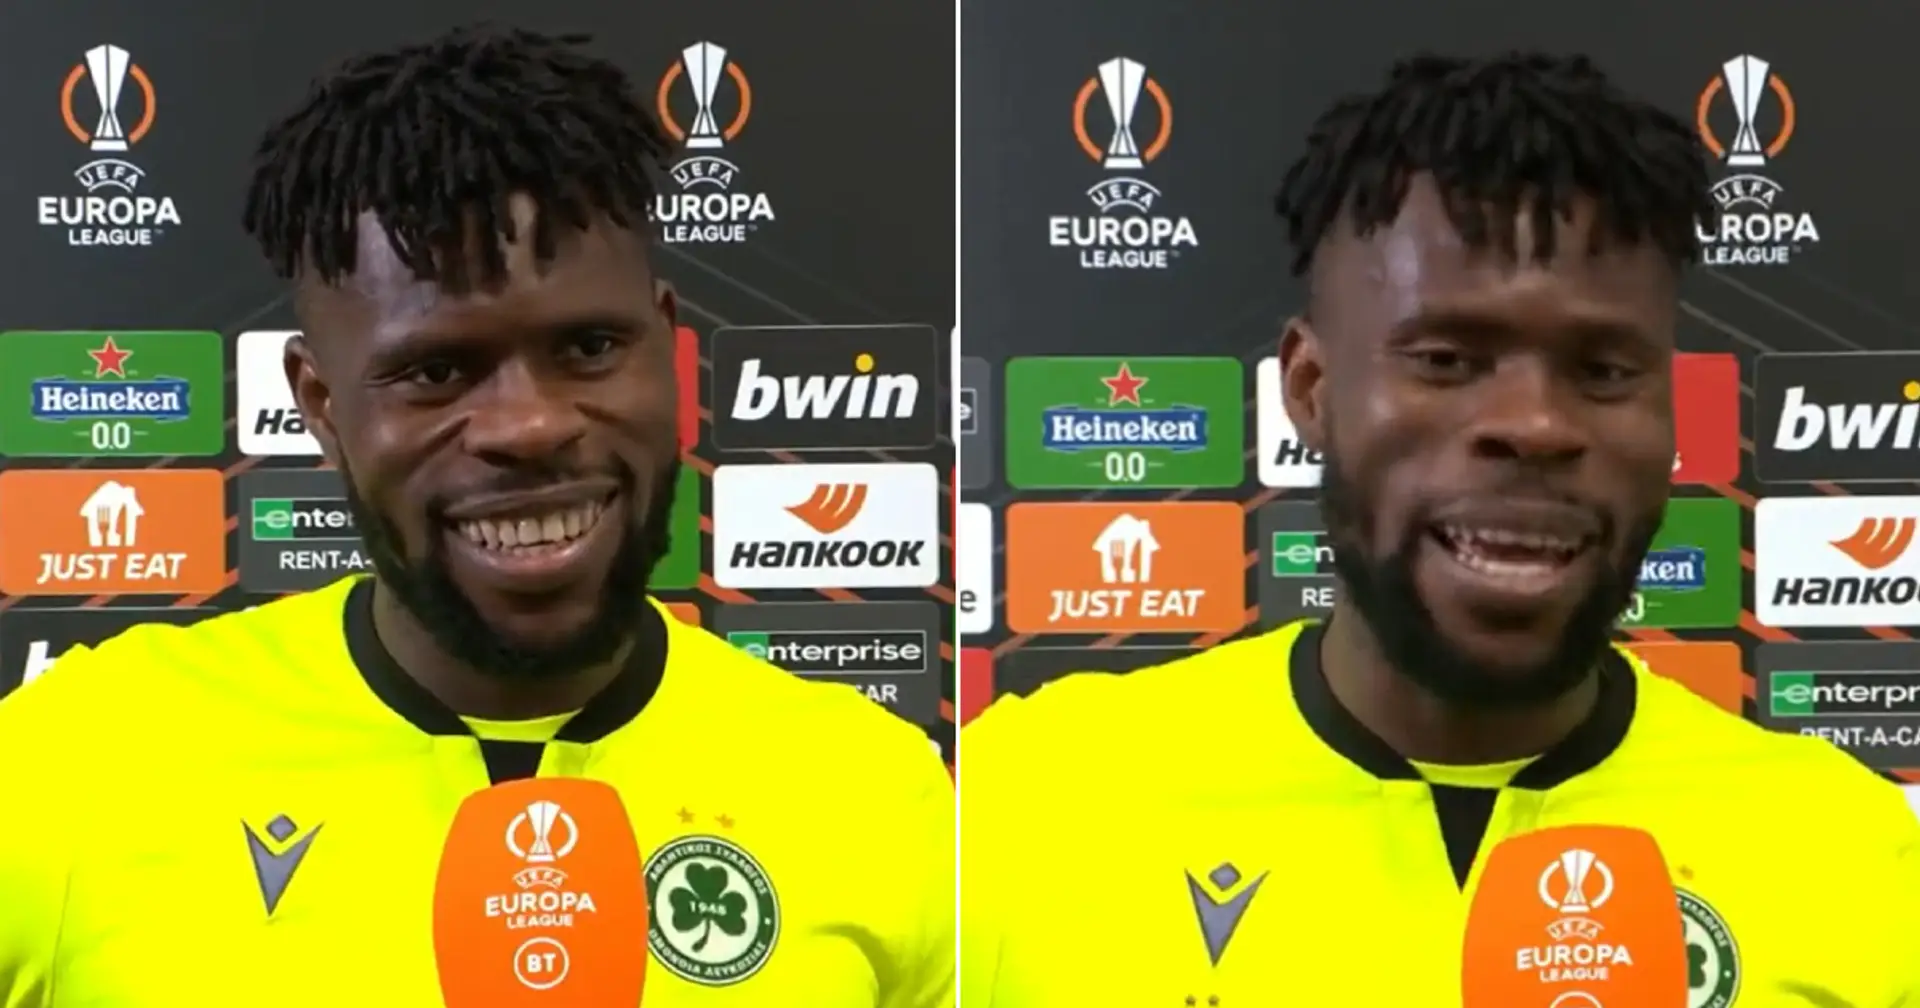 'Dream come true': Omonia keeper Uzoho reacts after brilliant game against his favourite club Man United